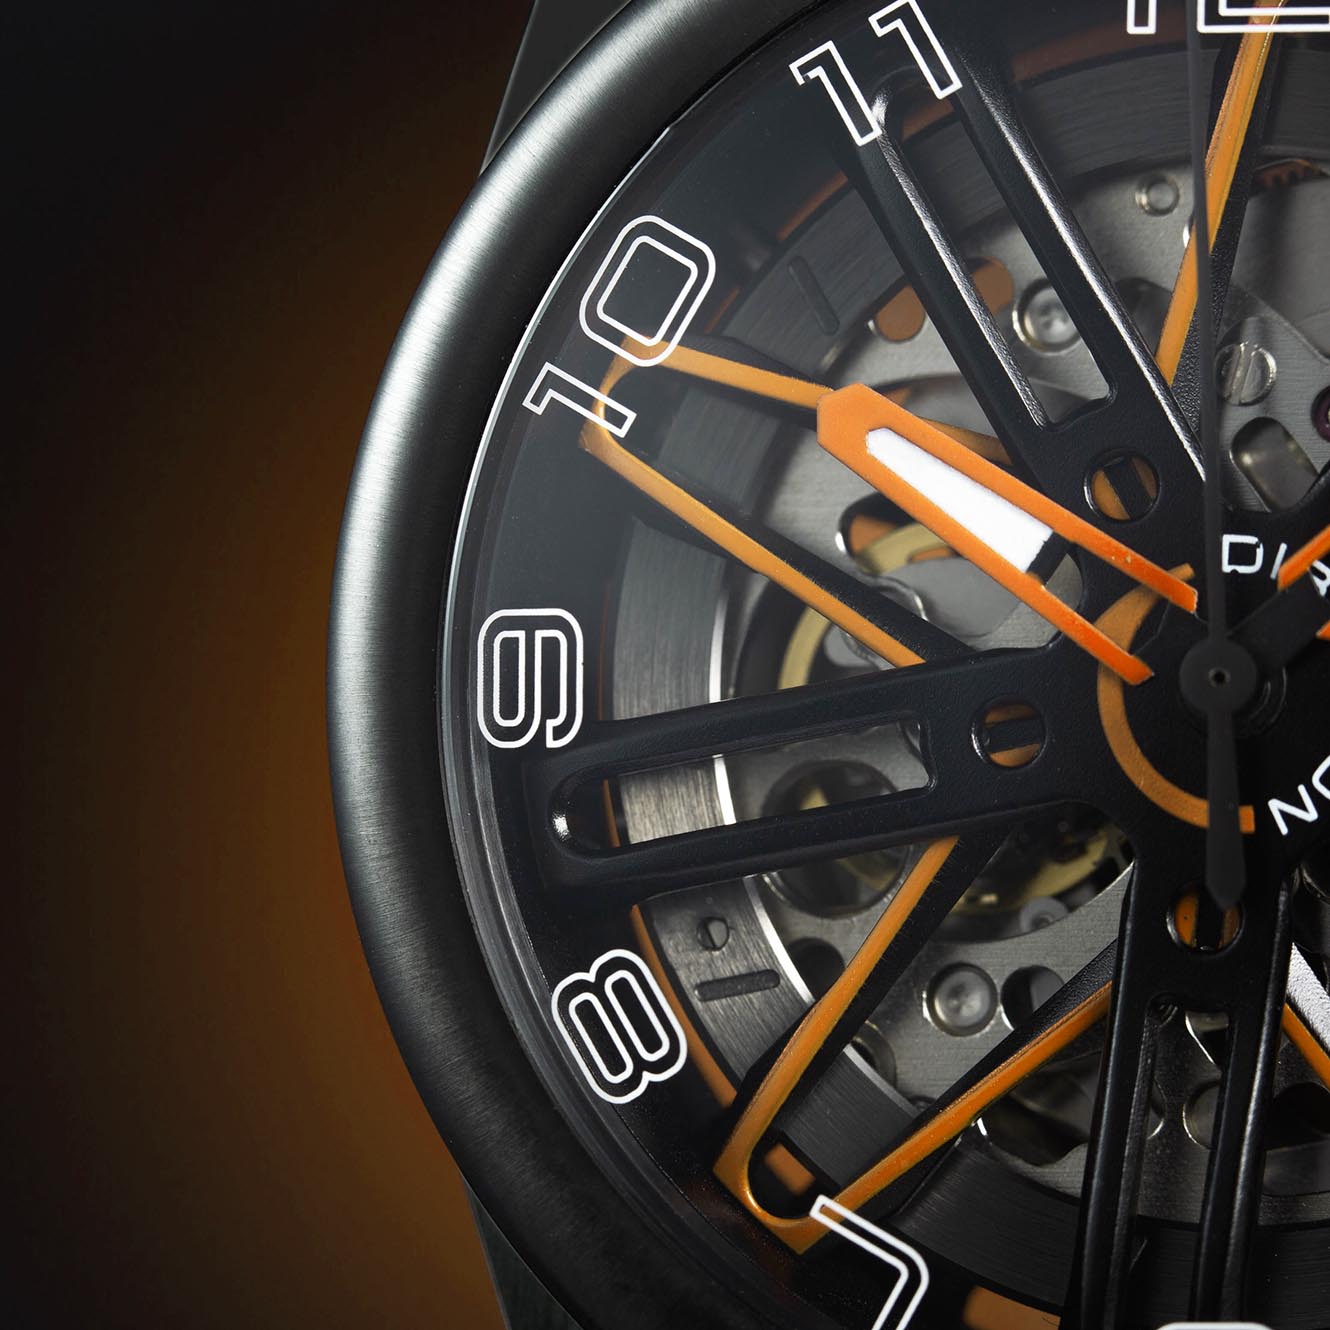 RIM GT Ø42mm in orange and green | Mens Luxury Watches | Italian Designed Watches